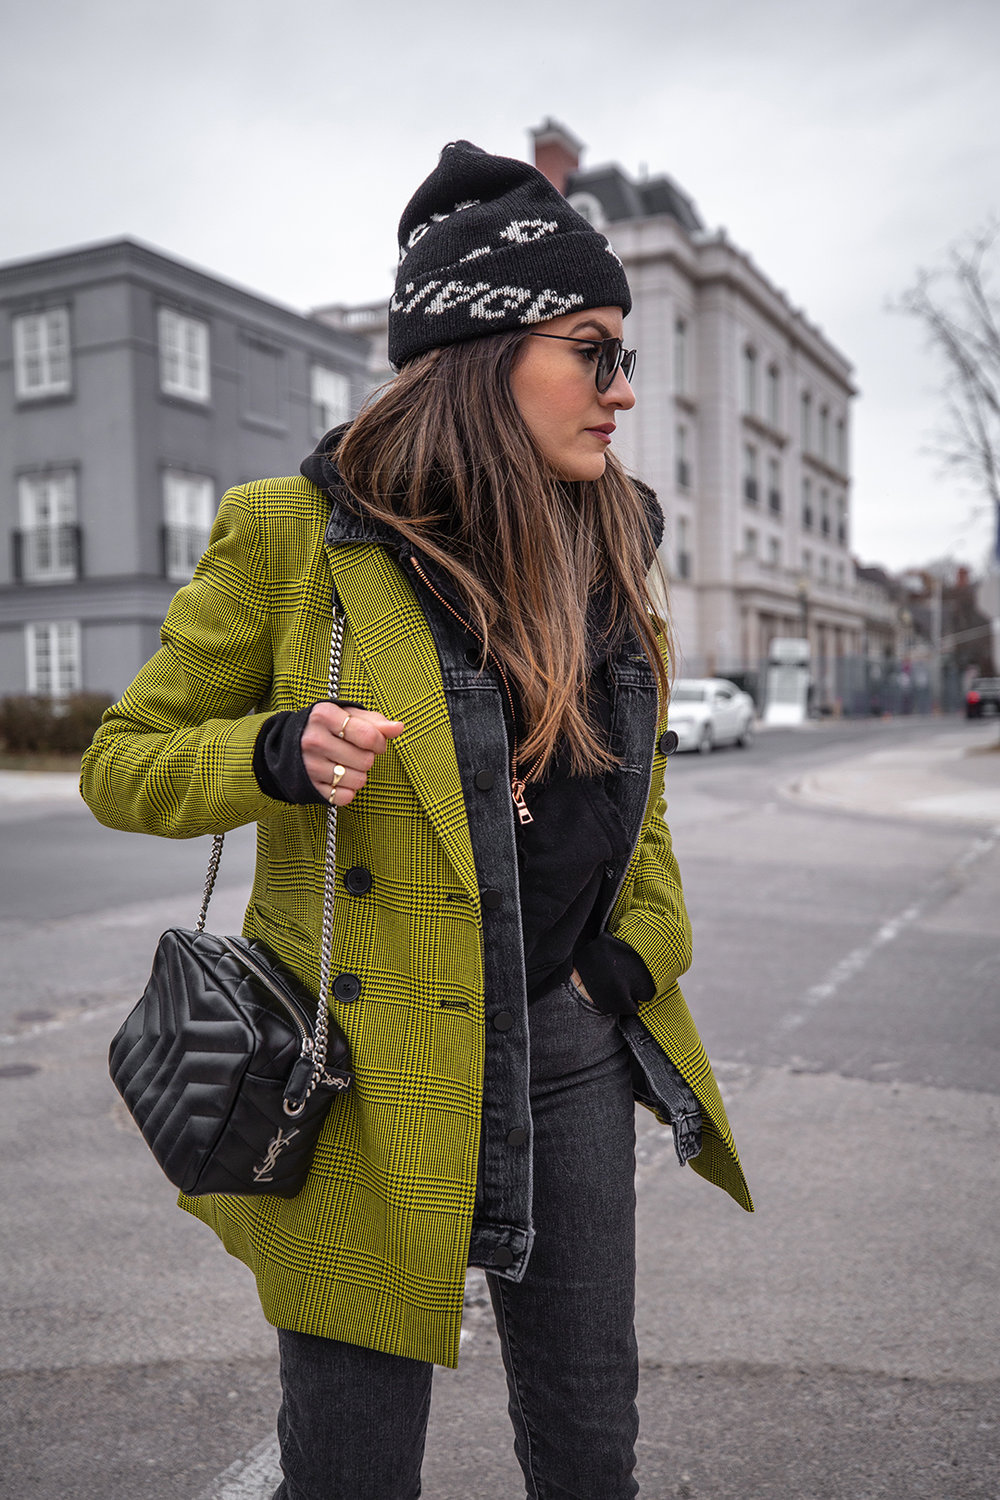 Ditch Winter & Try Layers Instead (Or Don't) — WOAHSTYLE